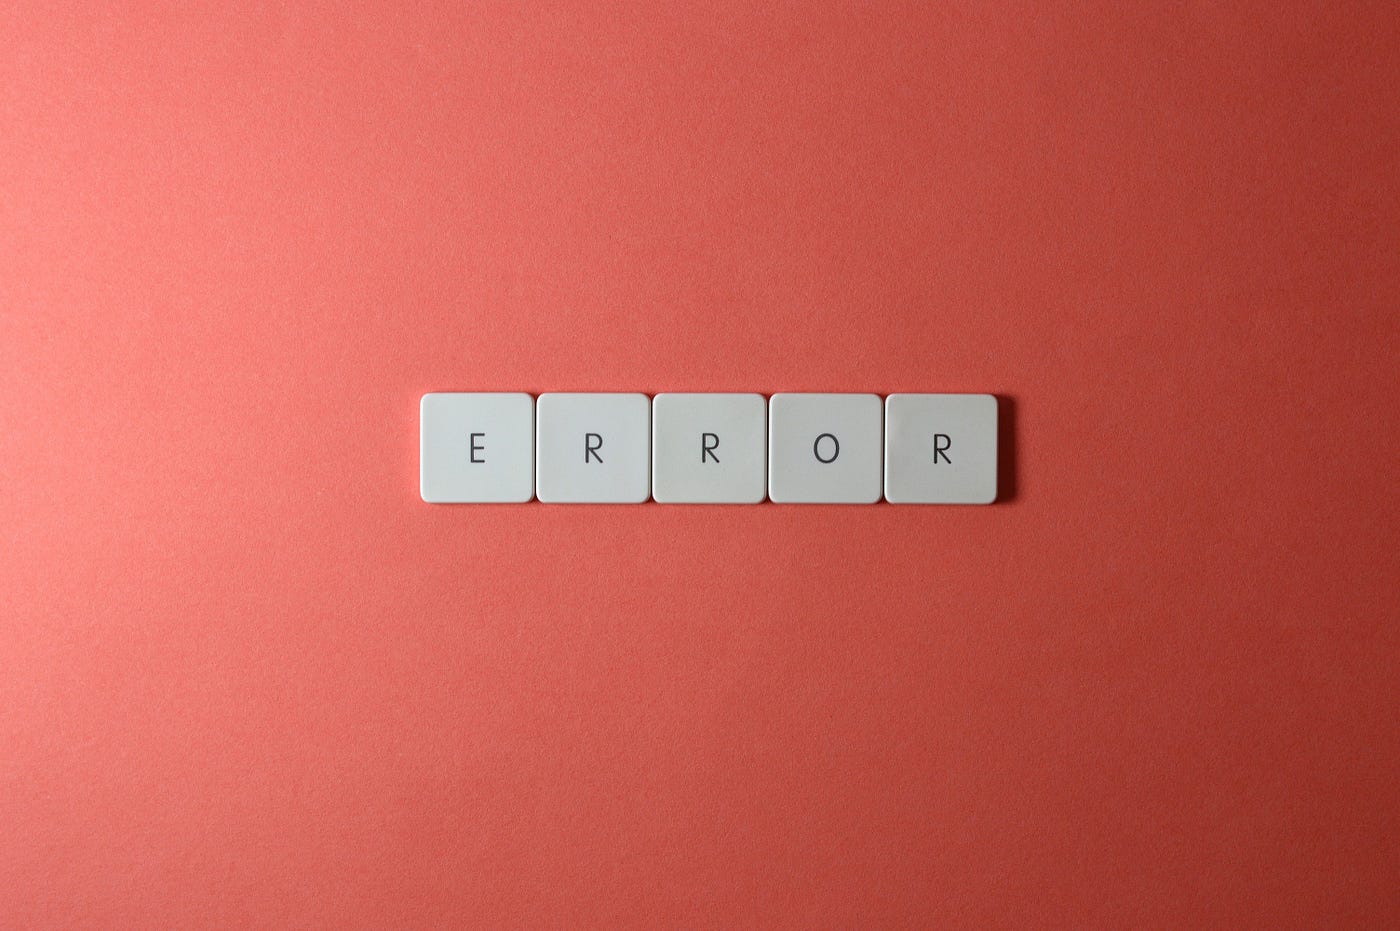 Exception Handling Best Practices - AnAr Solutions